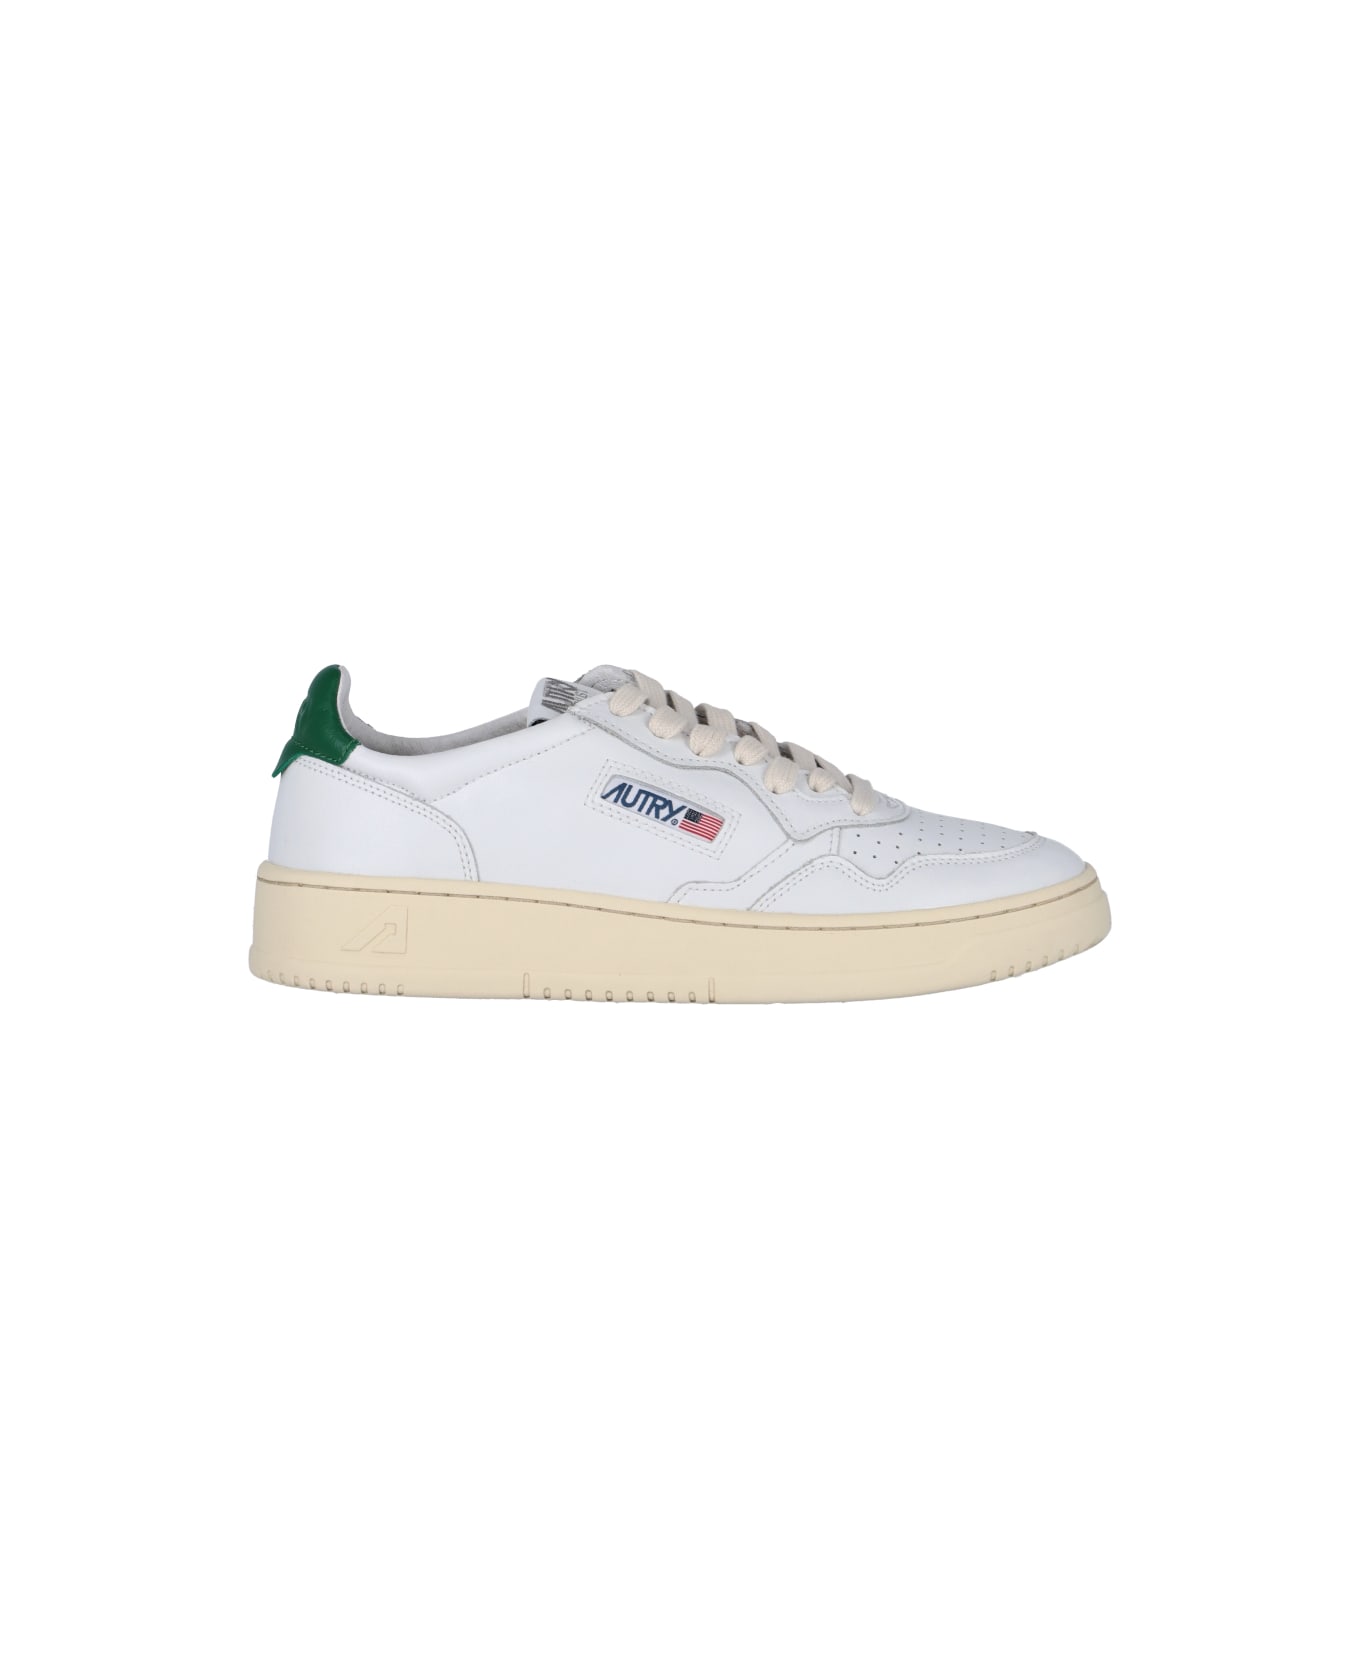 Autry Low Man Sneakers - Bianco